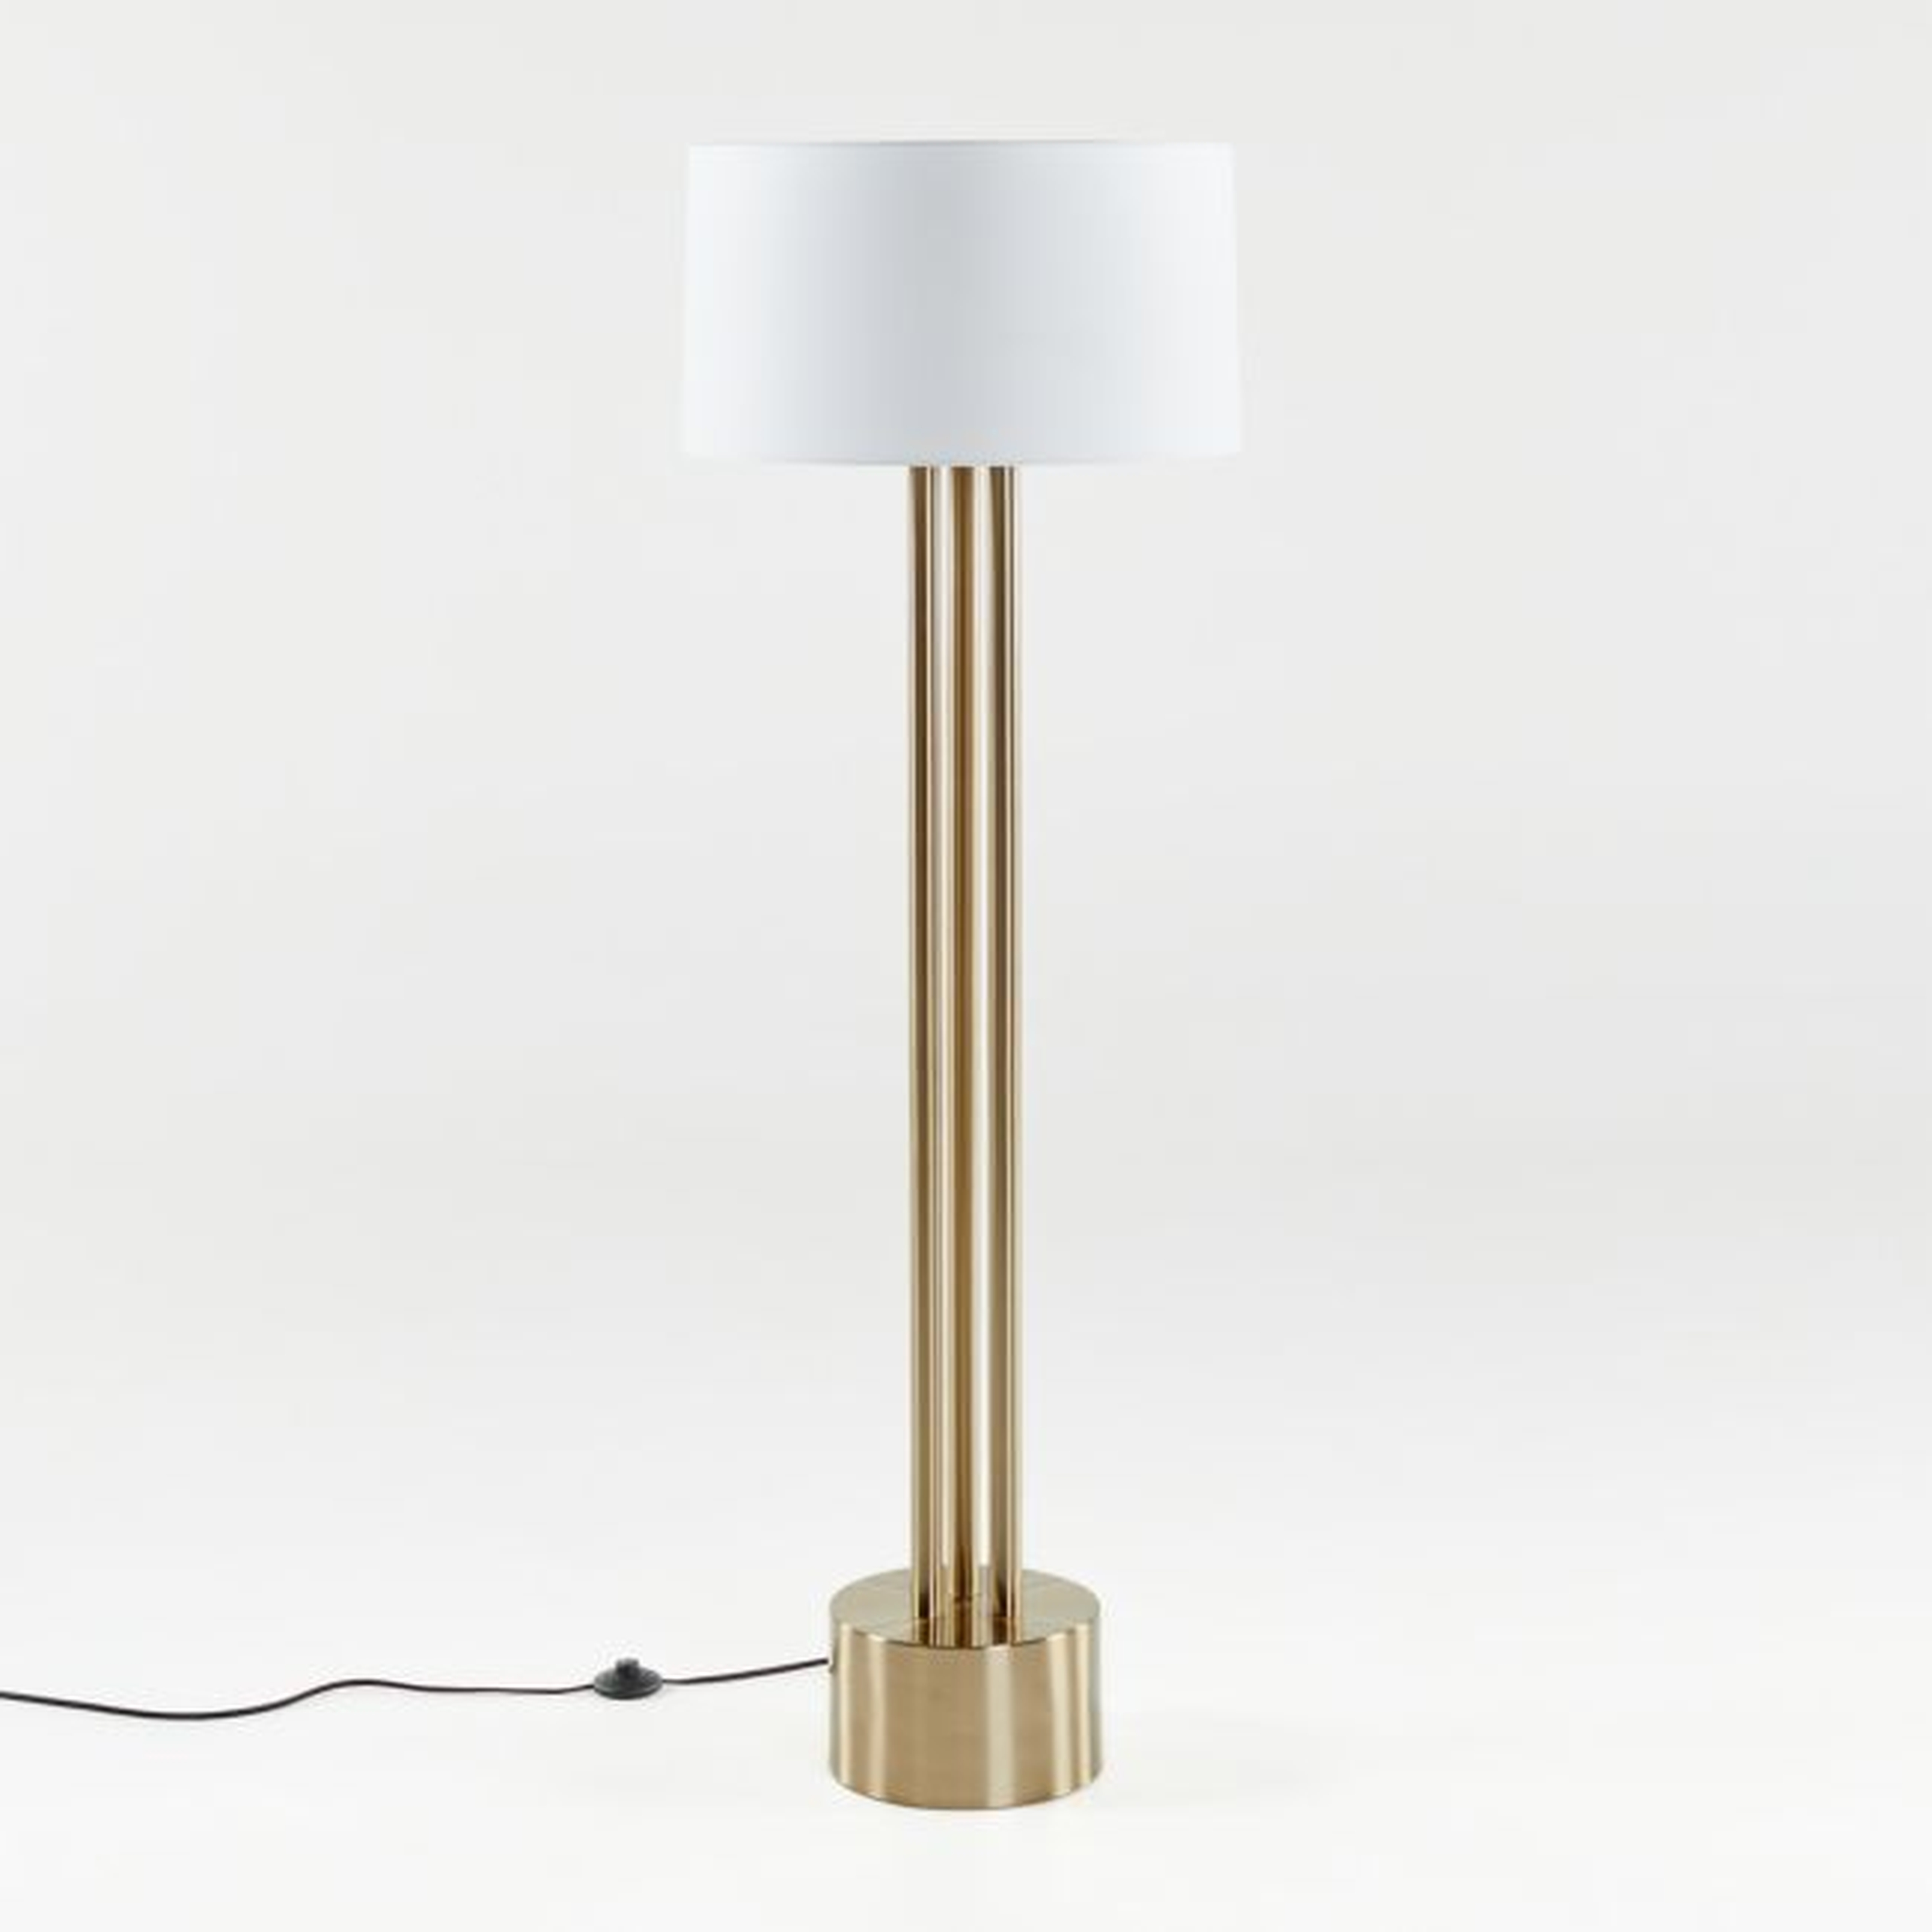 Pipette Tube Floor Lamp - Crate and Barrel